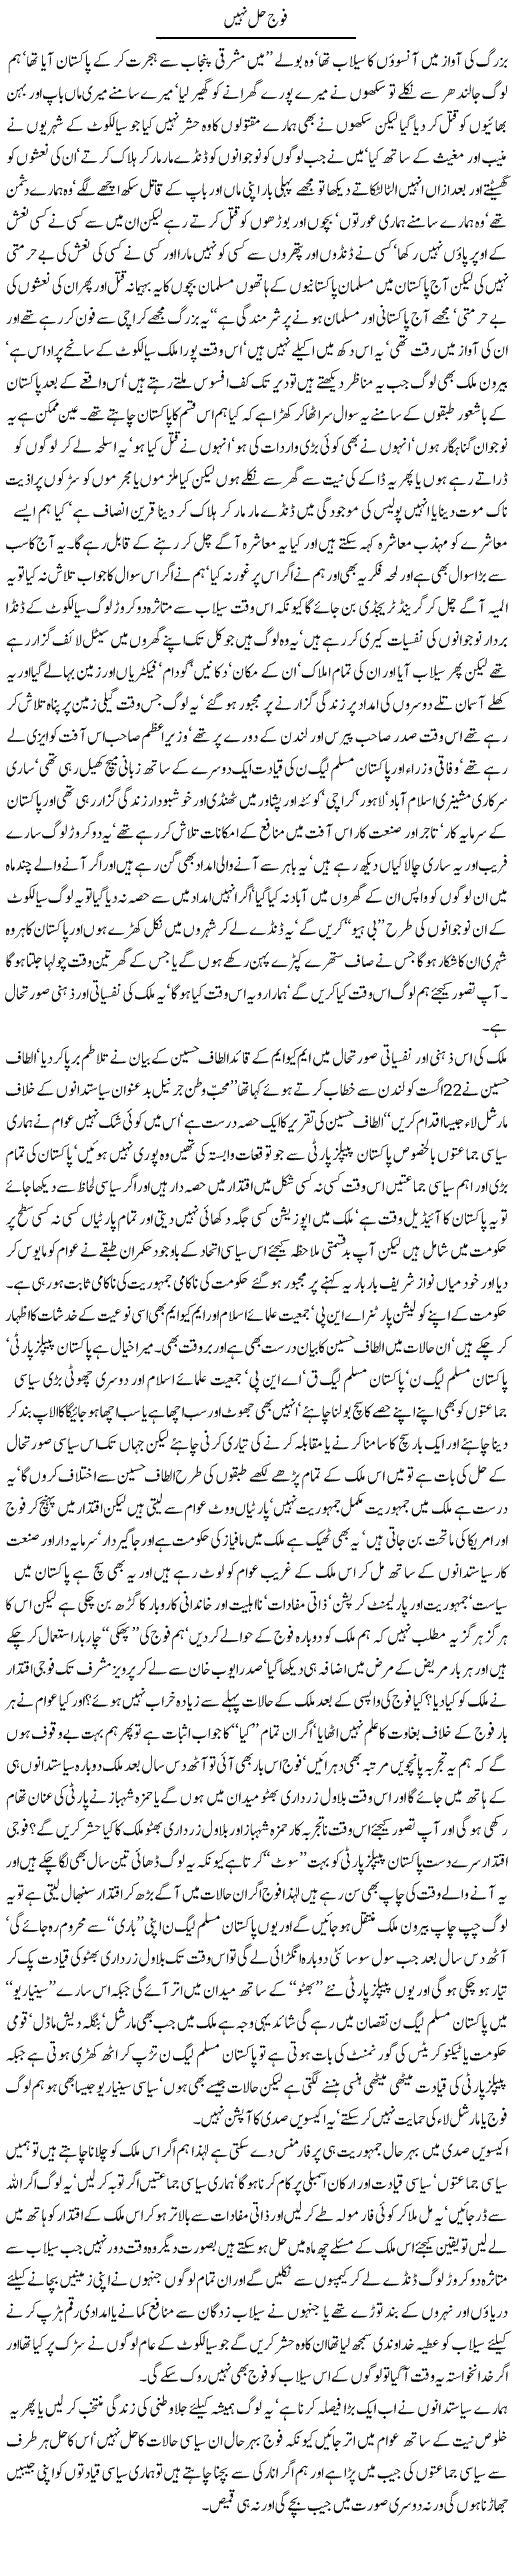 Army No Solution Express Column Javed Chaudhry 26 August 2010